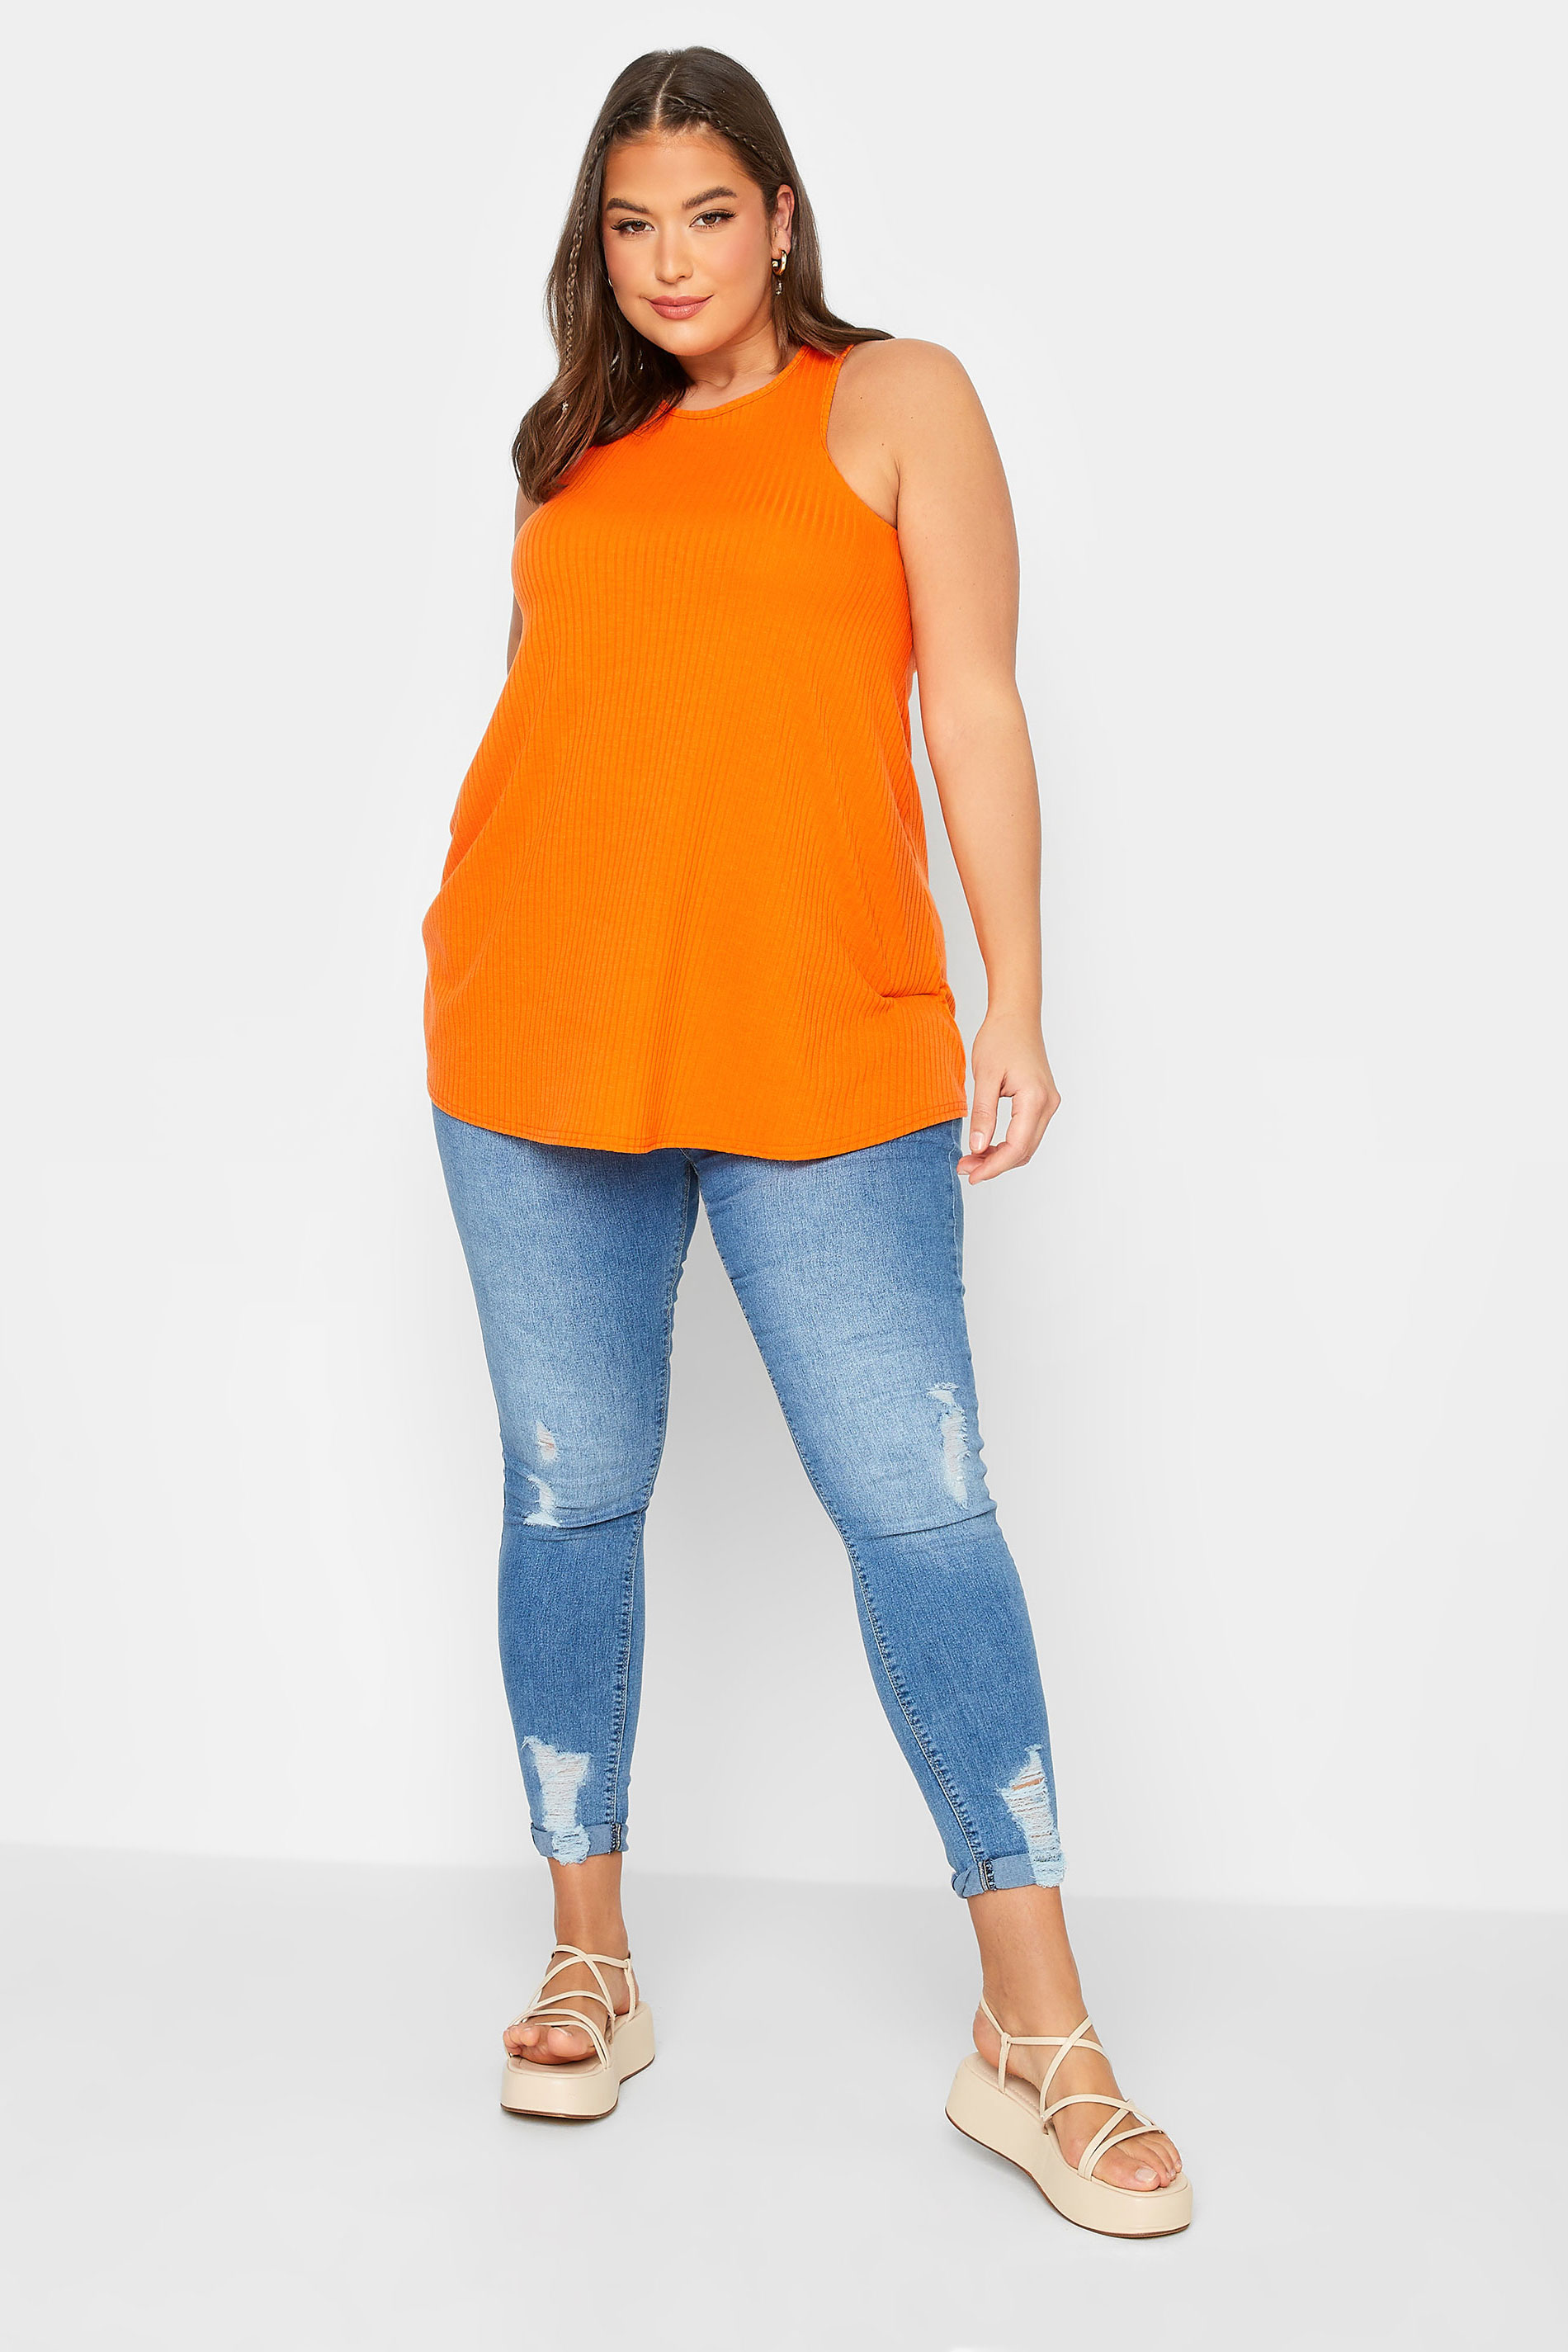 LIMITED COLLECTION Plus Size Orange Ribbed Racer Cami Vest Top | Yours Clothing  2